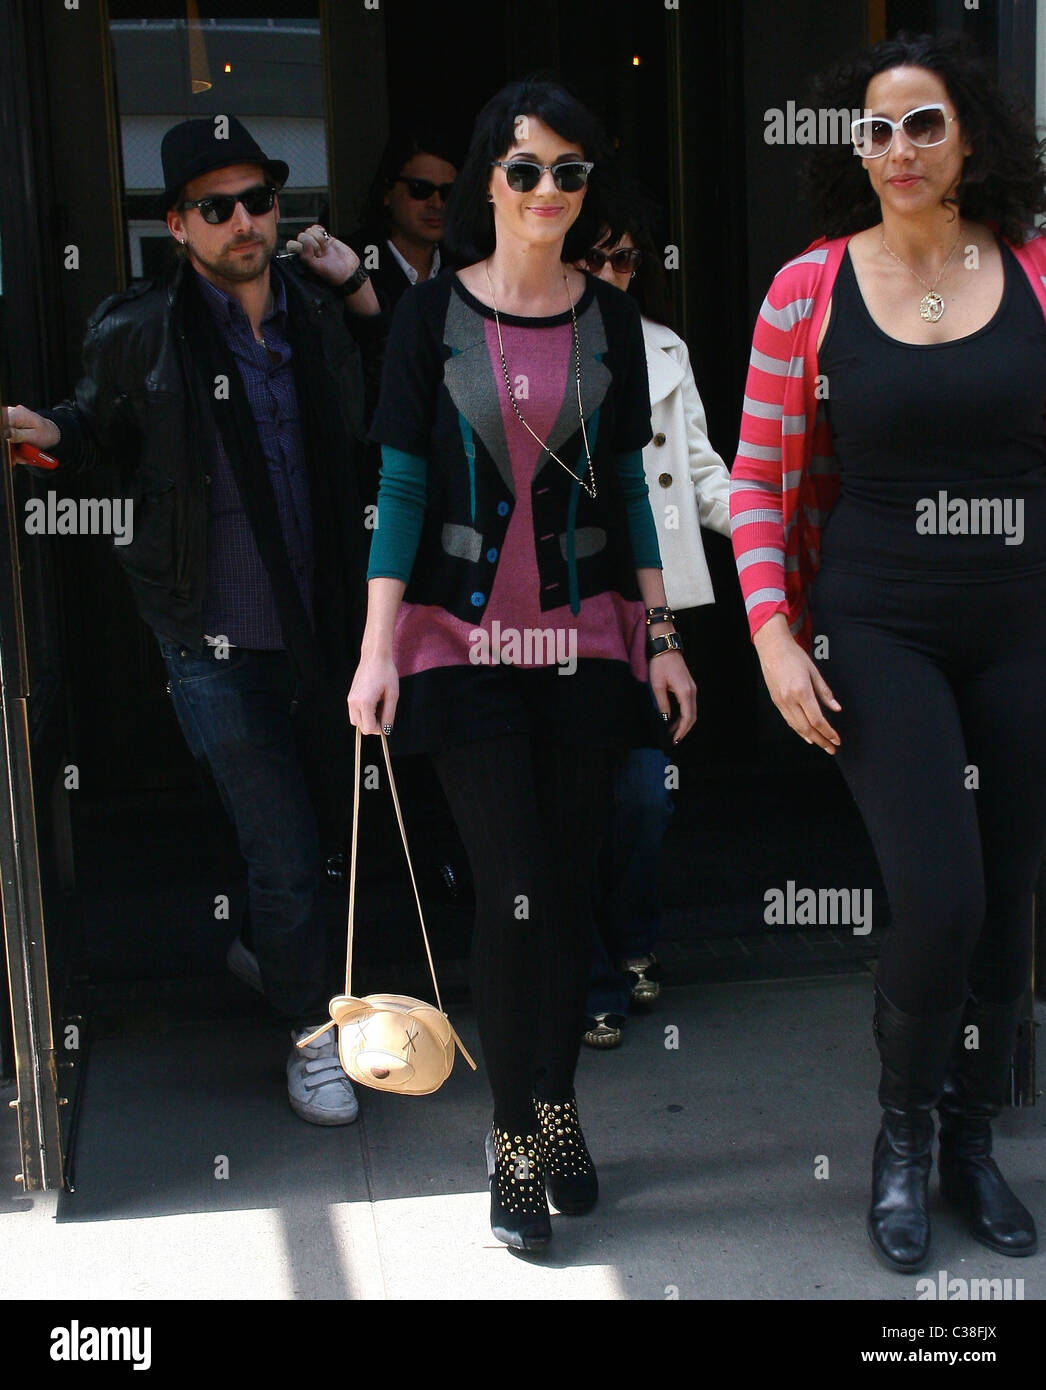 Katy Perry arriving for soundcheck at the Fillmore New York at Irving Plaza for her sold out concert New York City, USA - Stock Photo